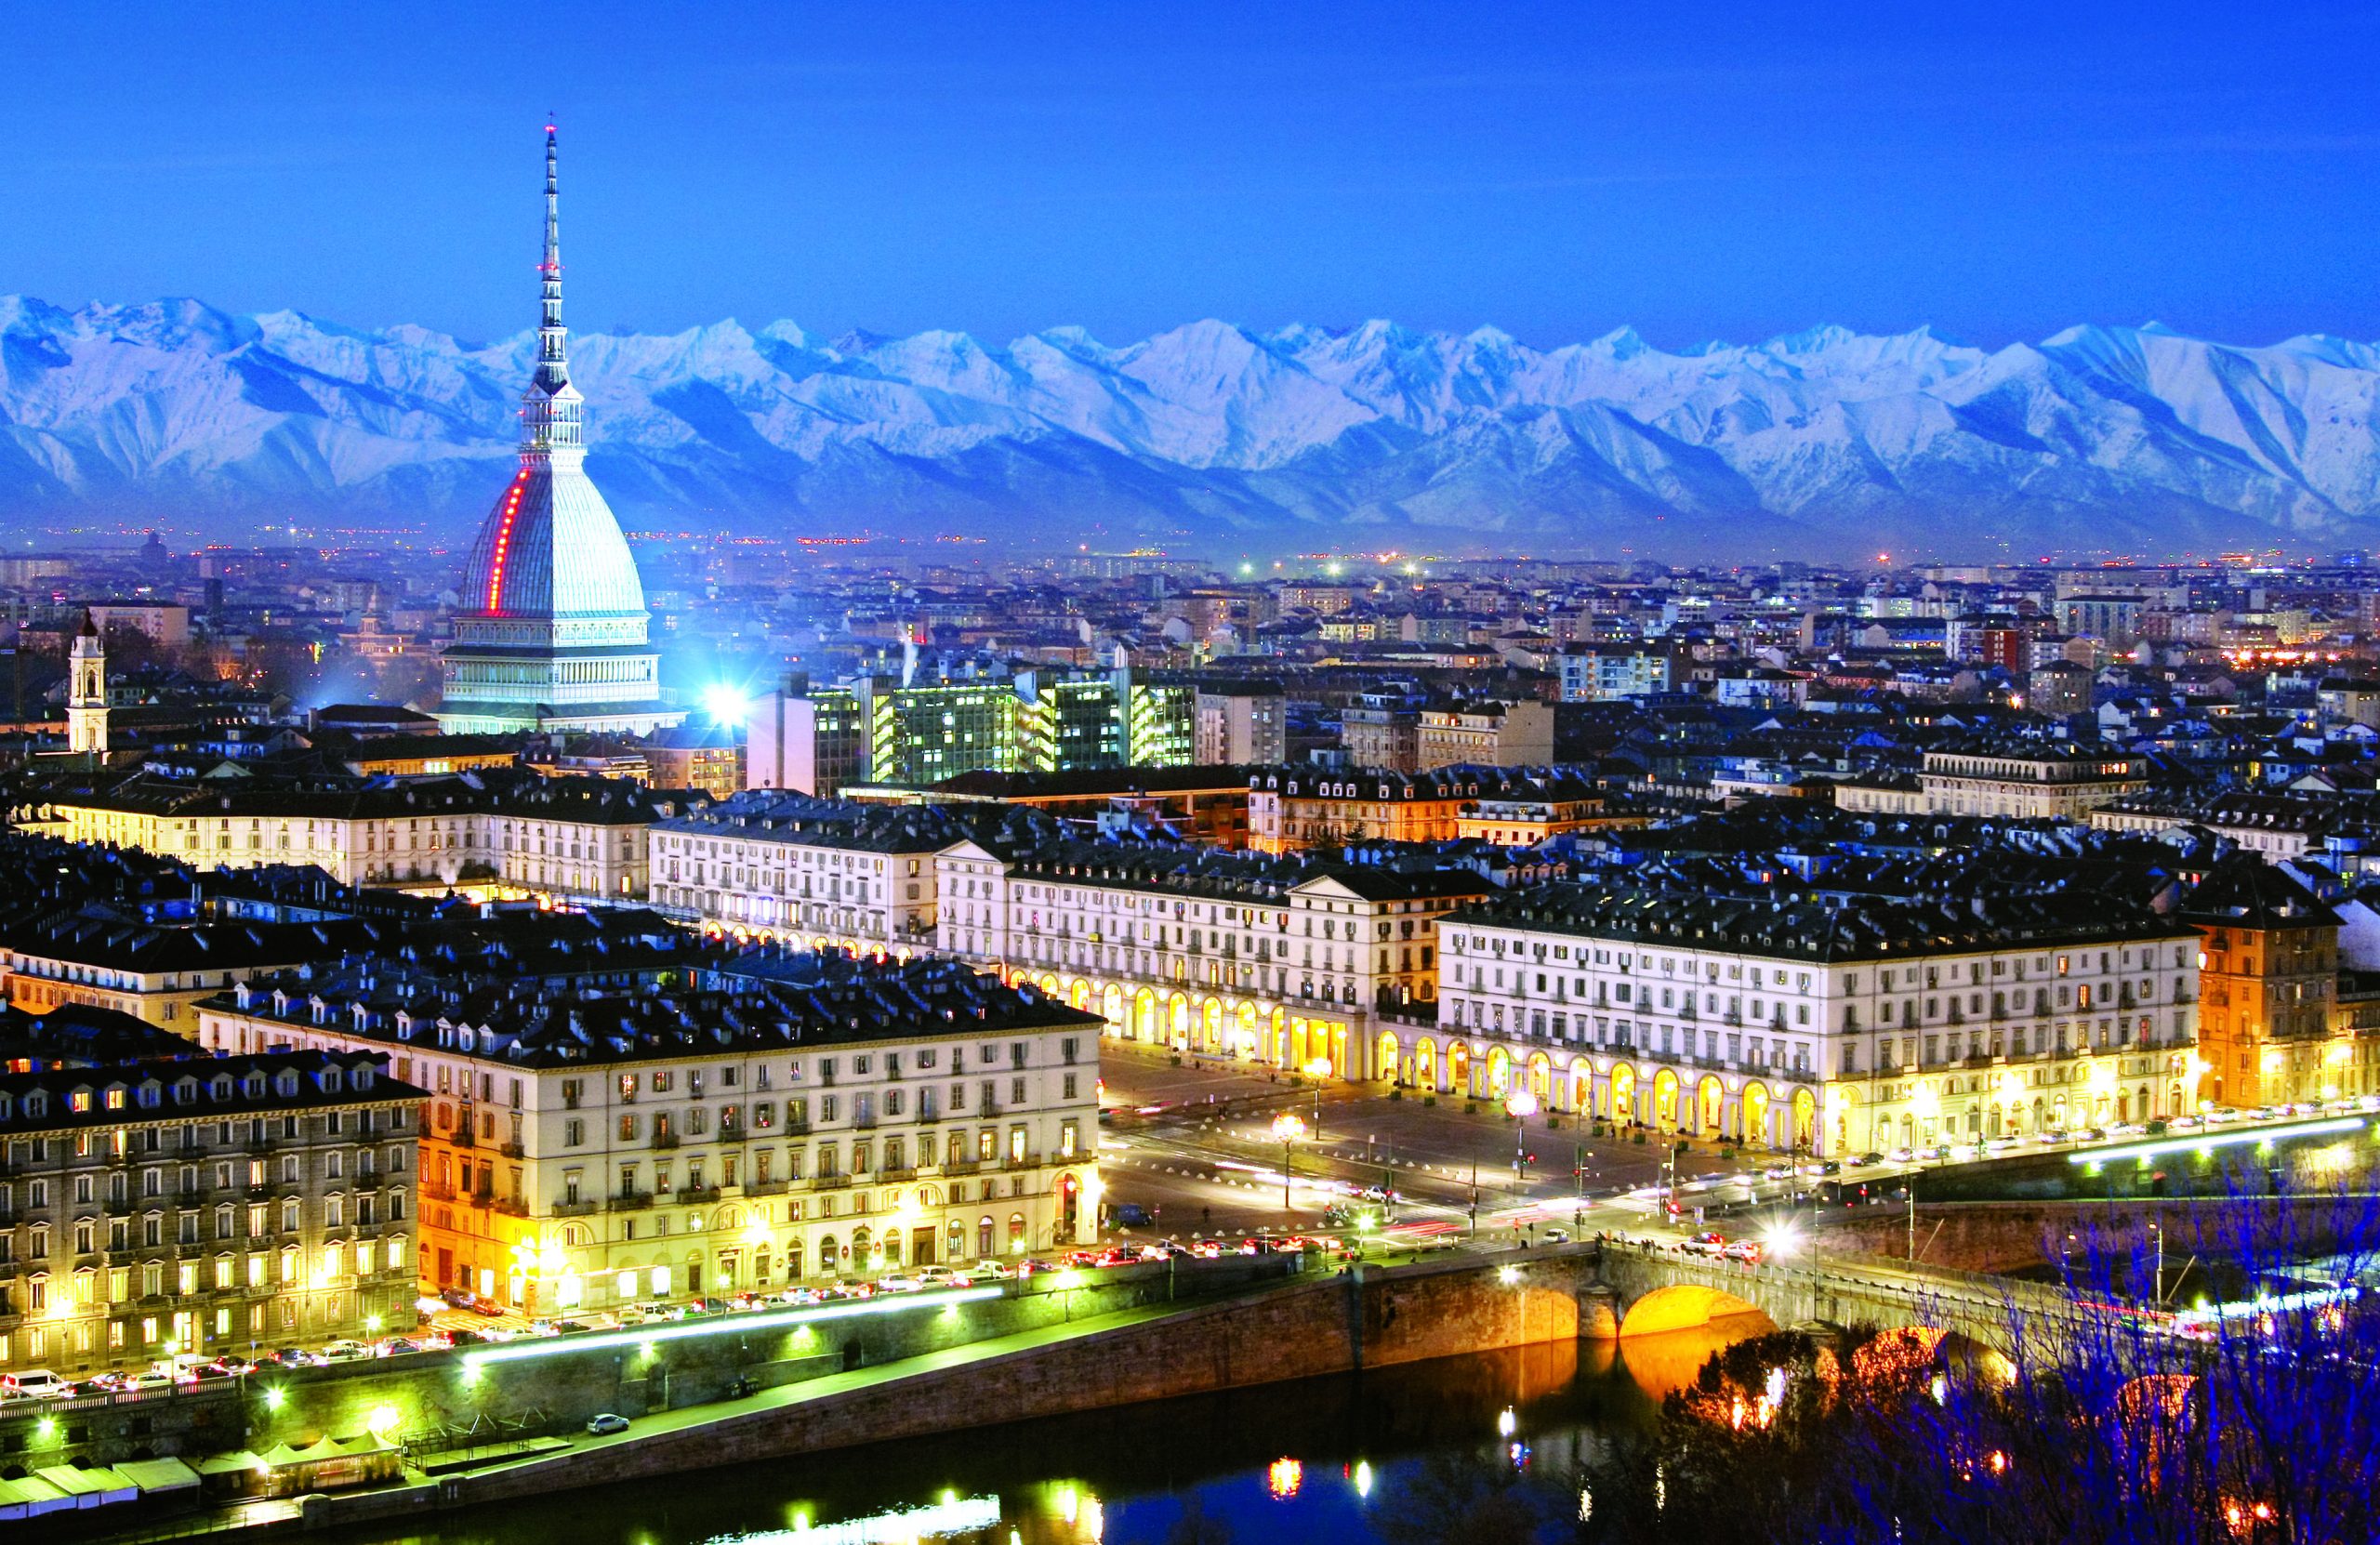 Panoramic view of Turin with mountains and Mole Antonelliana, photo by Enrico Aretini